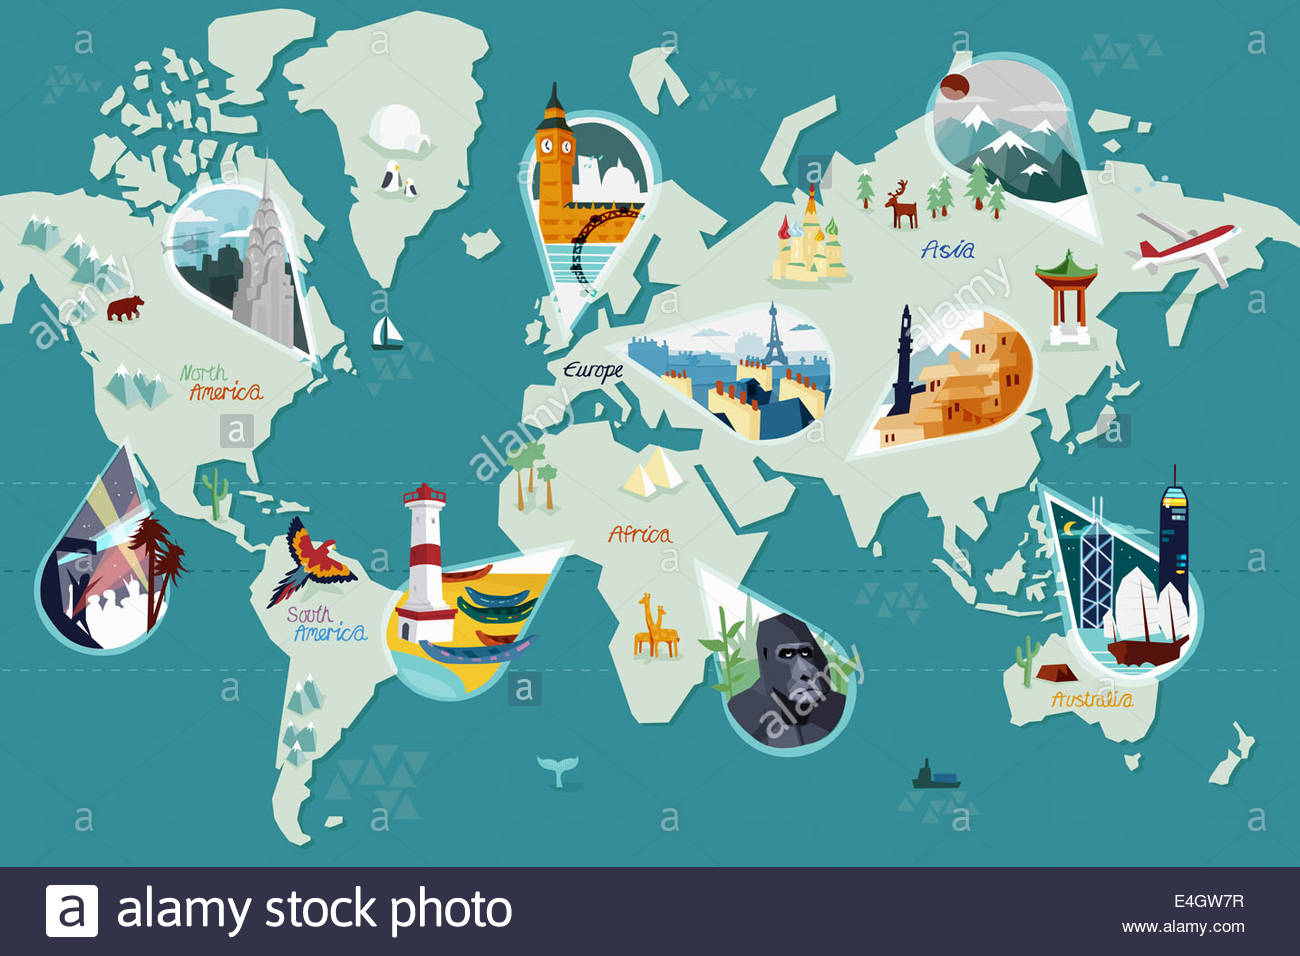 world tourist attractions map